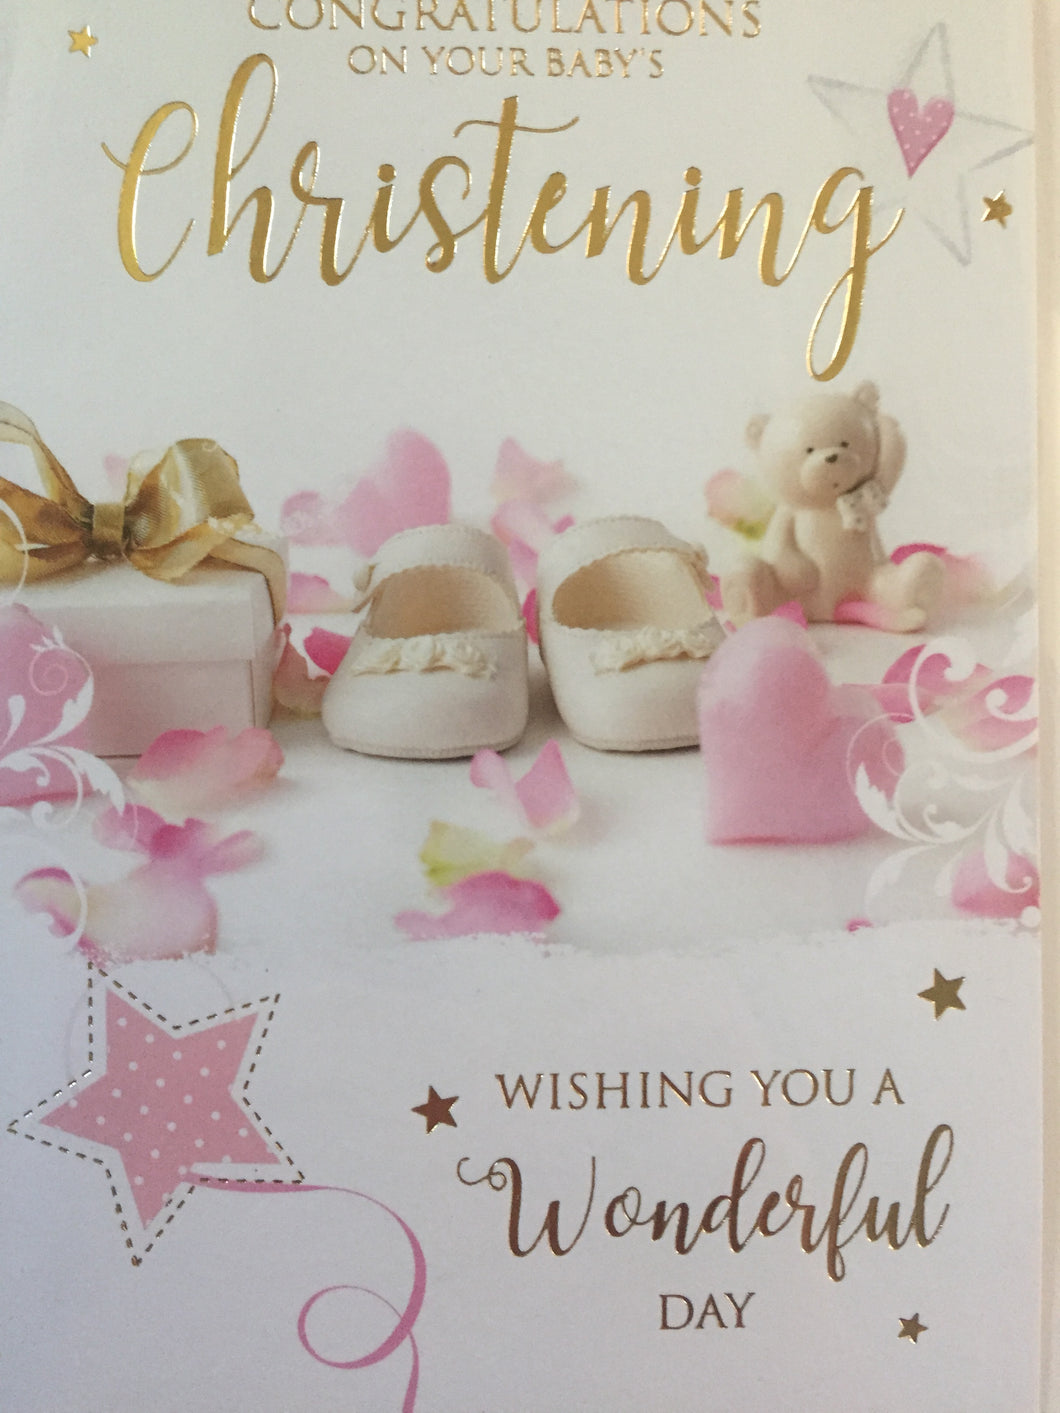 Girl  - Congratulations on your Babys Christening - The Alresford Gift Shop